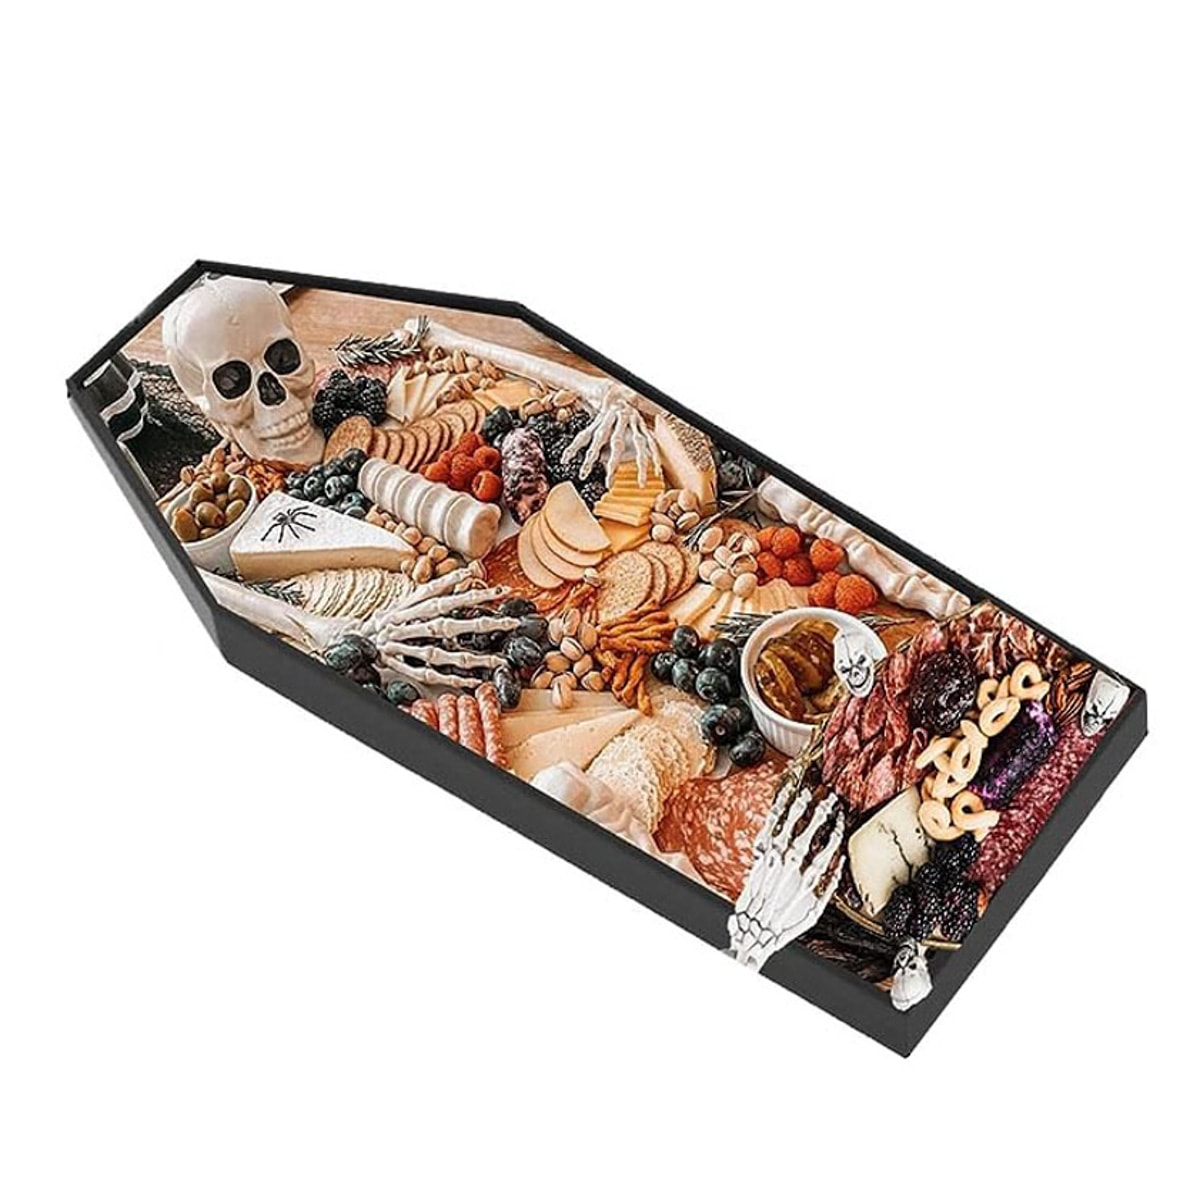 Coffin-shaped charcuterie board with various meats and cheeses.